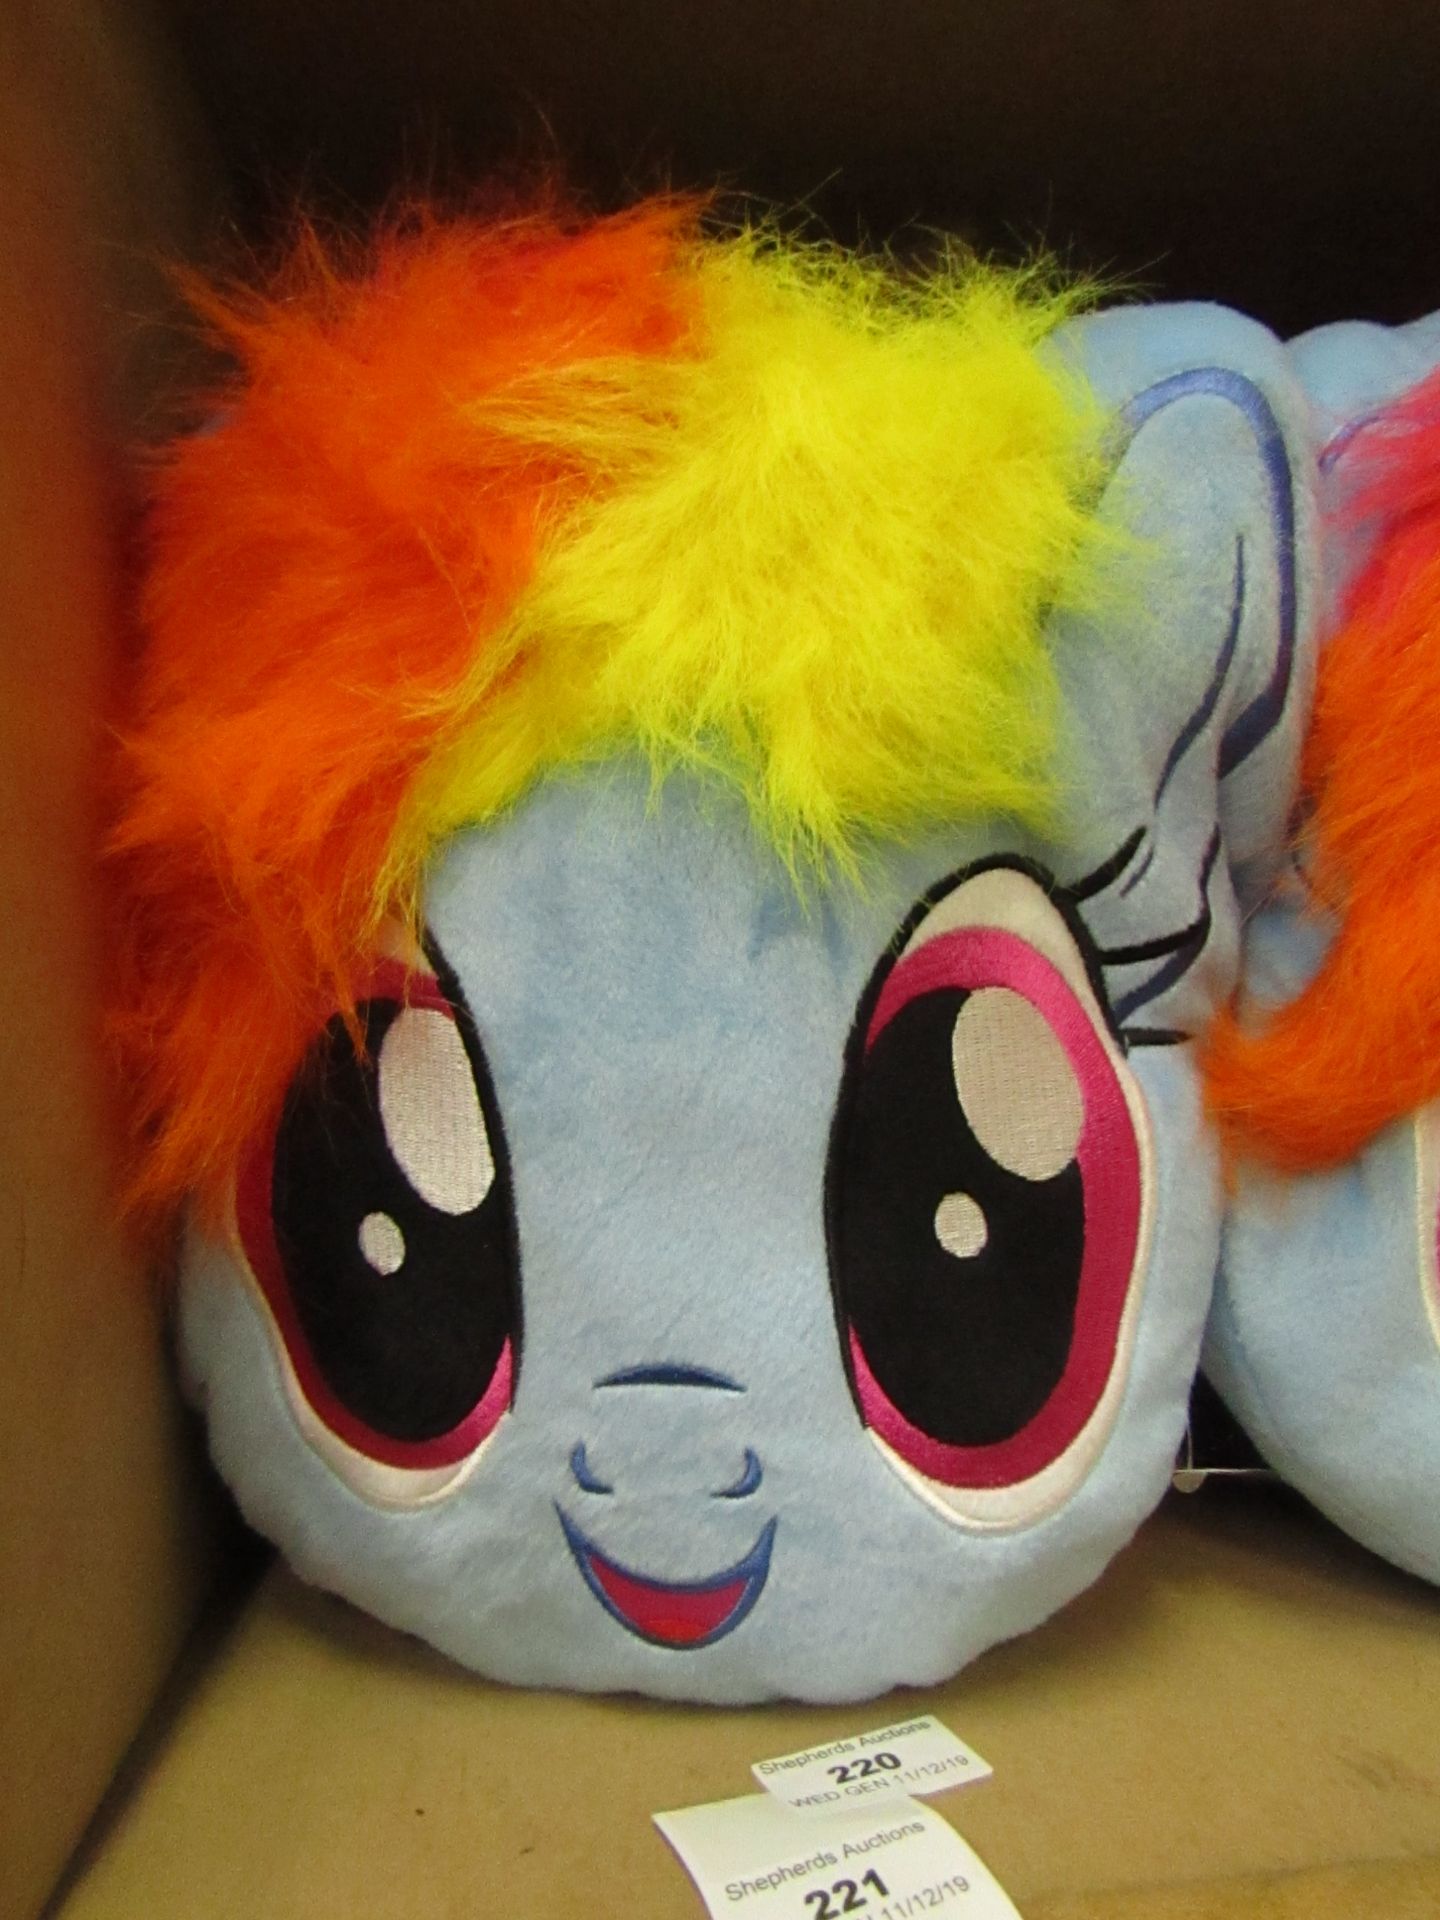 My Little Pony - Cushion, new and packaged.